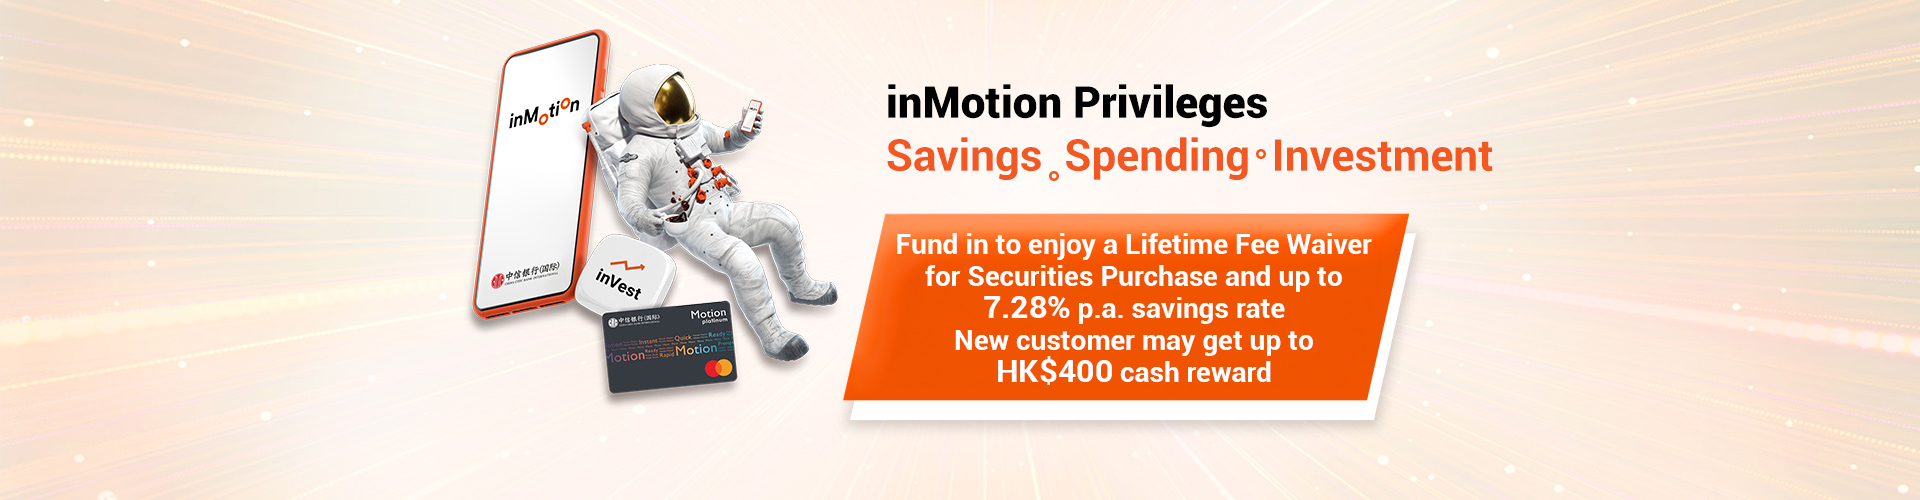 inMotion Customer Spending Savings Investment Service Privileges